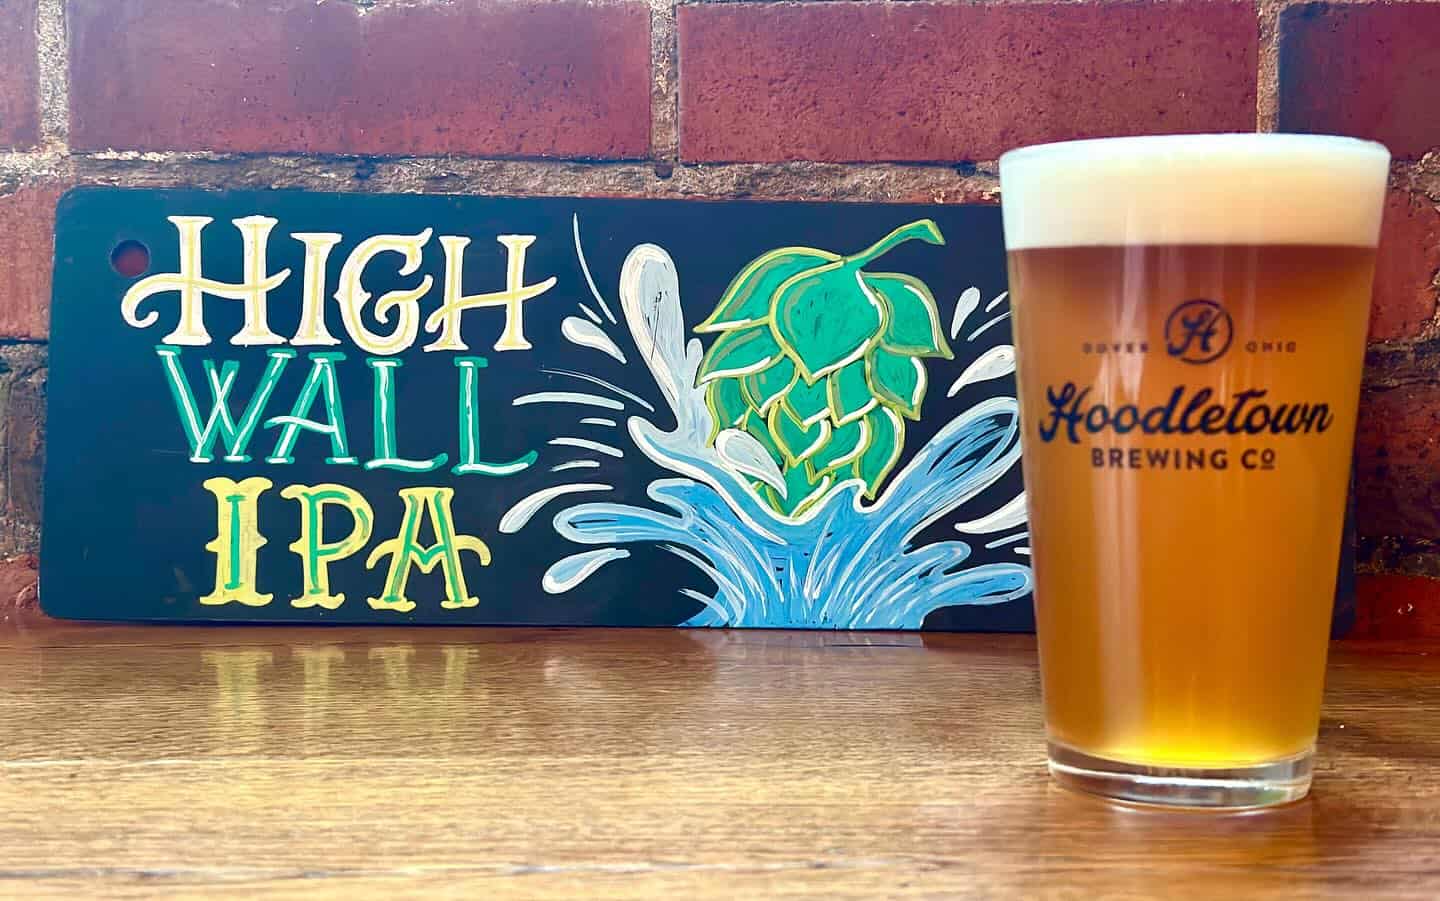 Image of Hoodletown Brewery's High Wall IPA in a pint glass with a sign next to it saying "High Wall IPA".